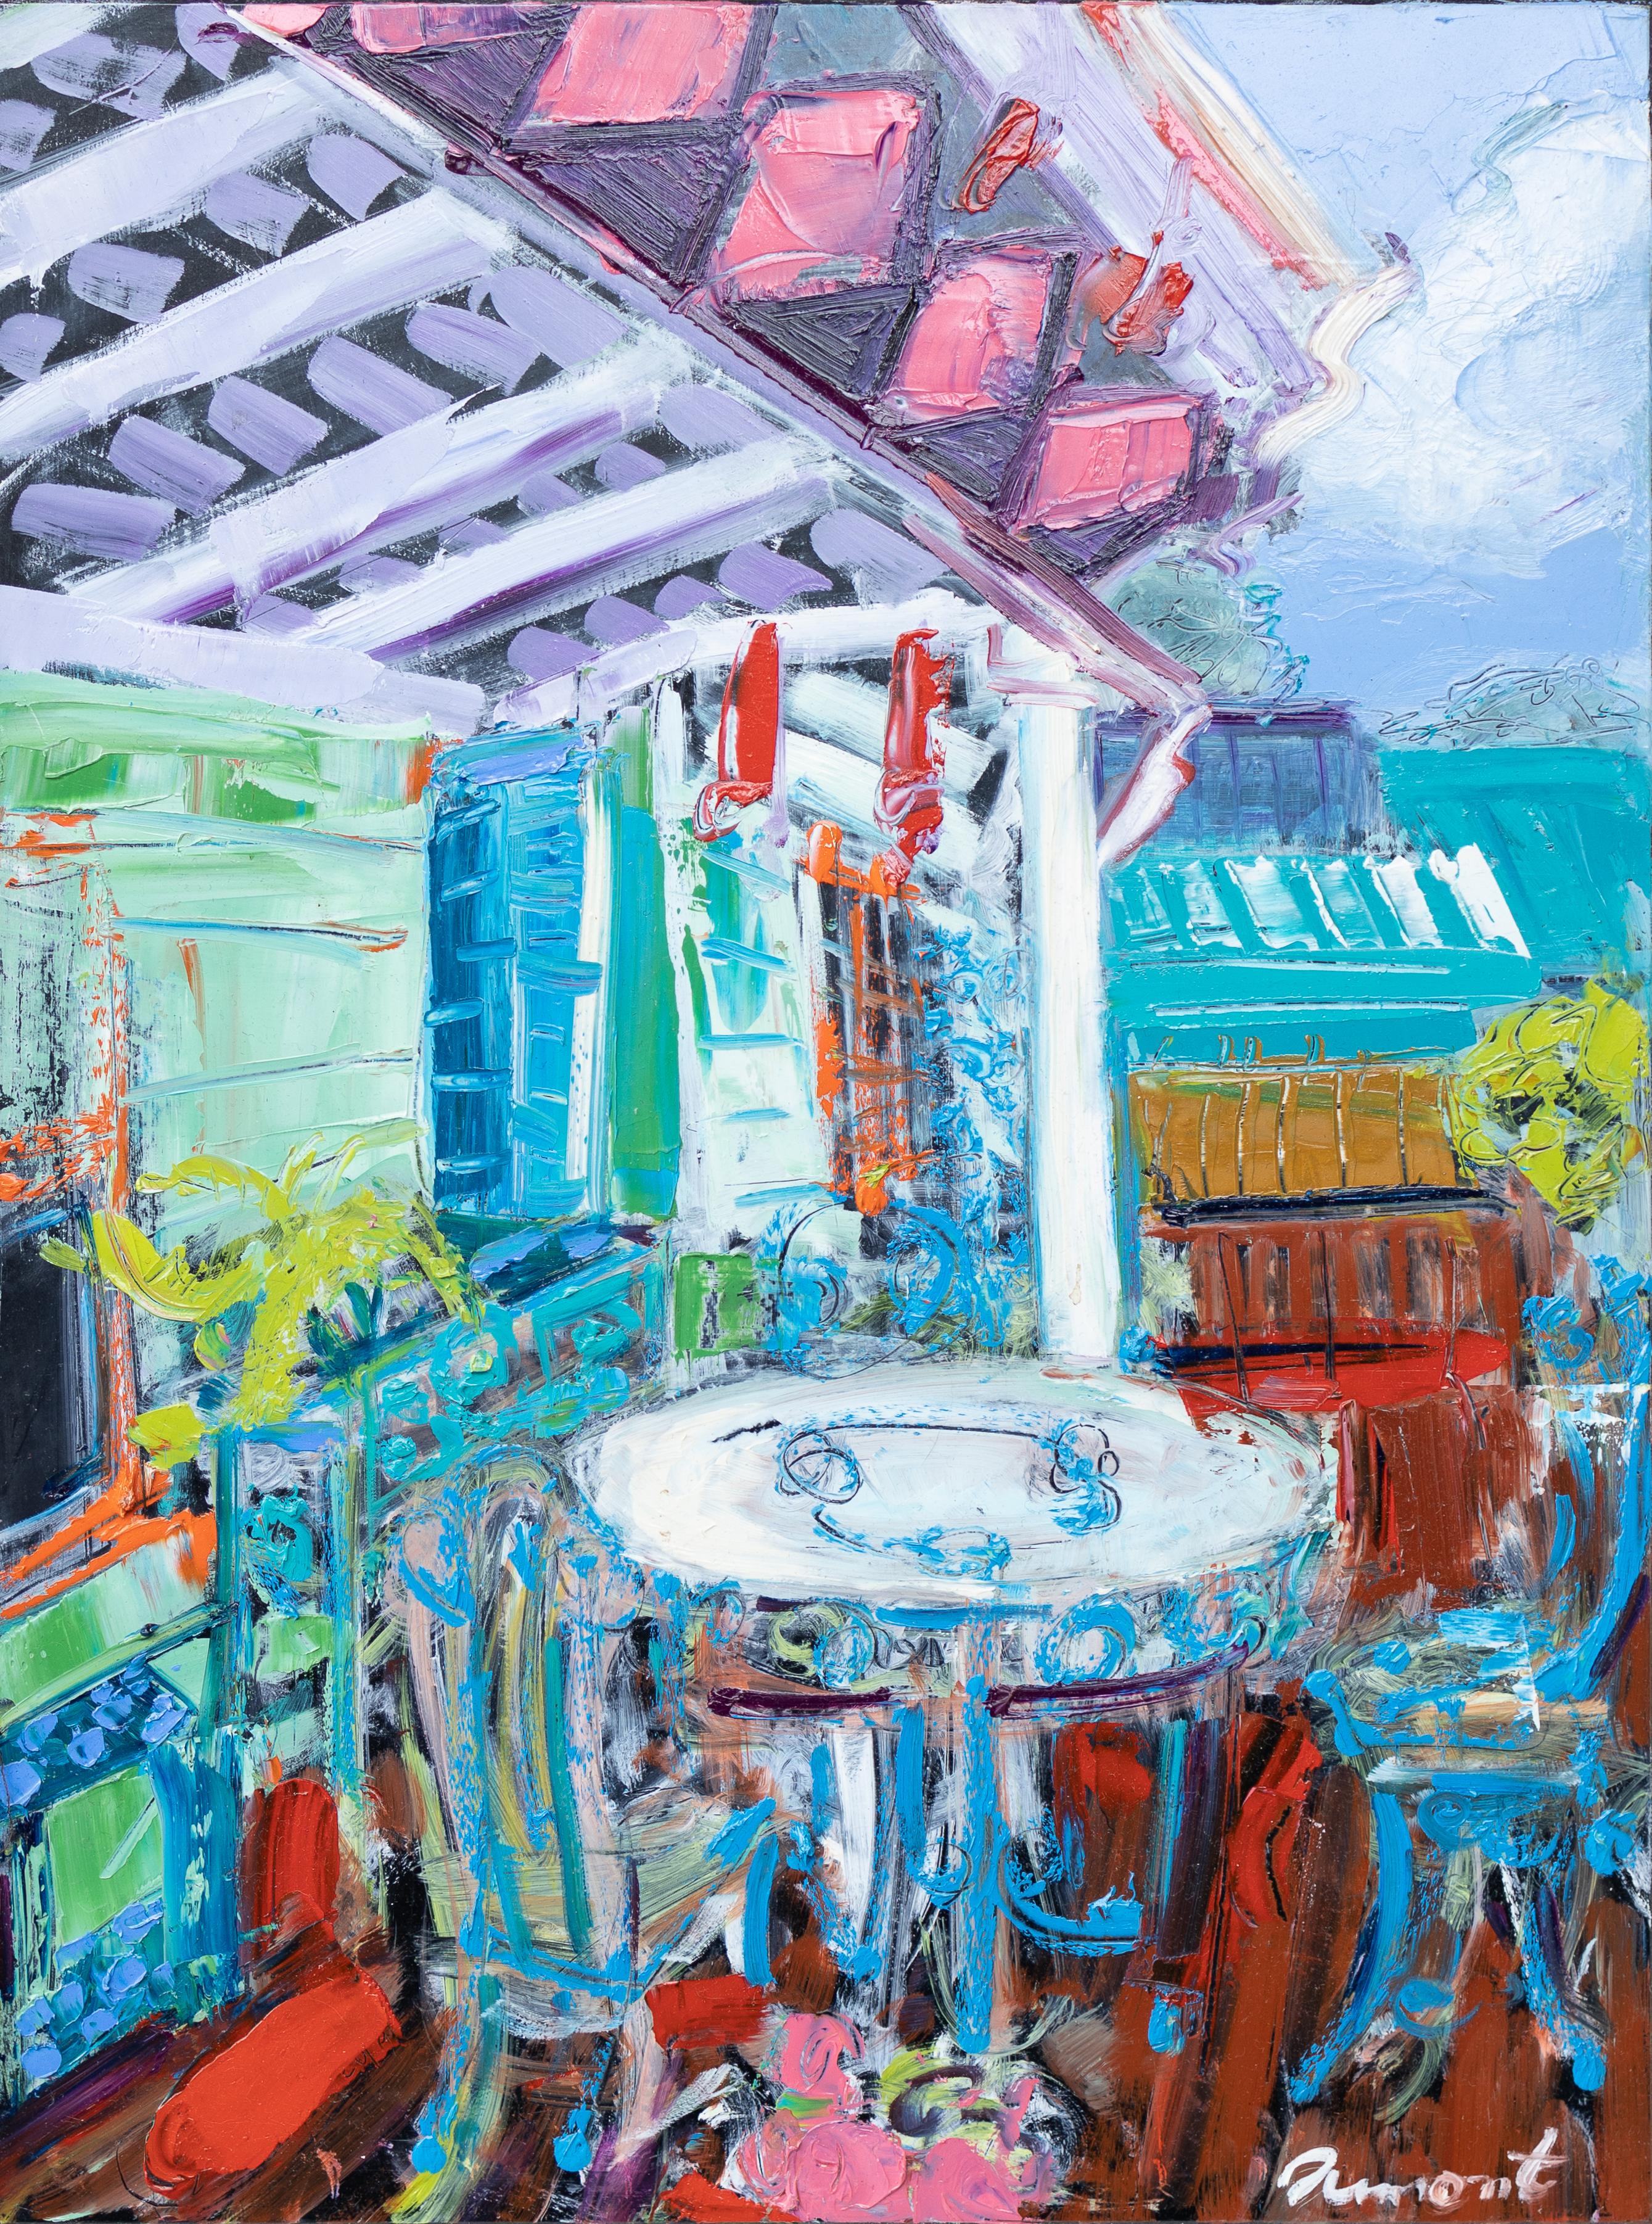 "Blue Licorice" Neo-Expressionist Urban Landscape Oil Painting